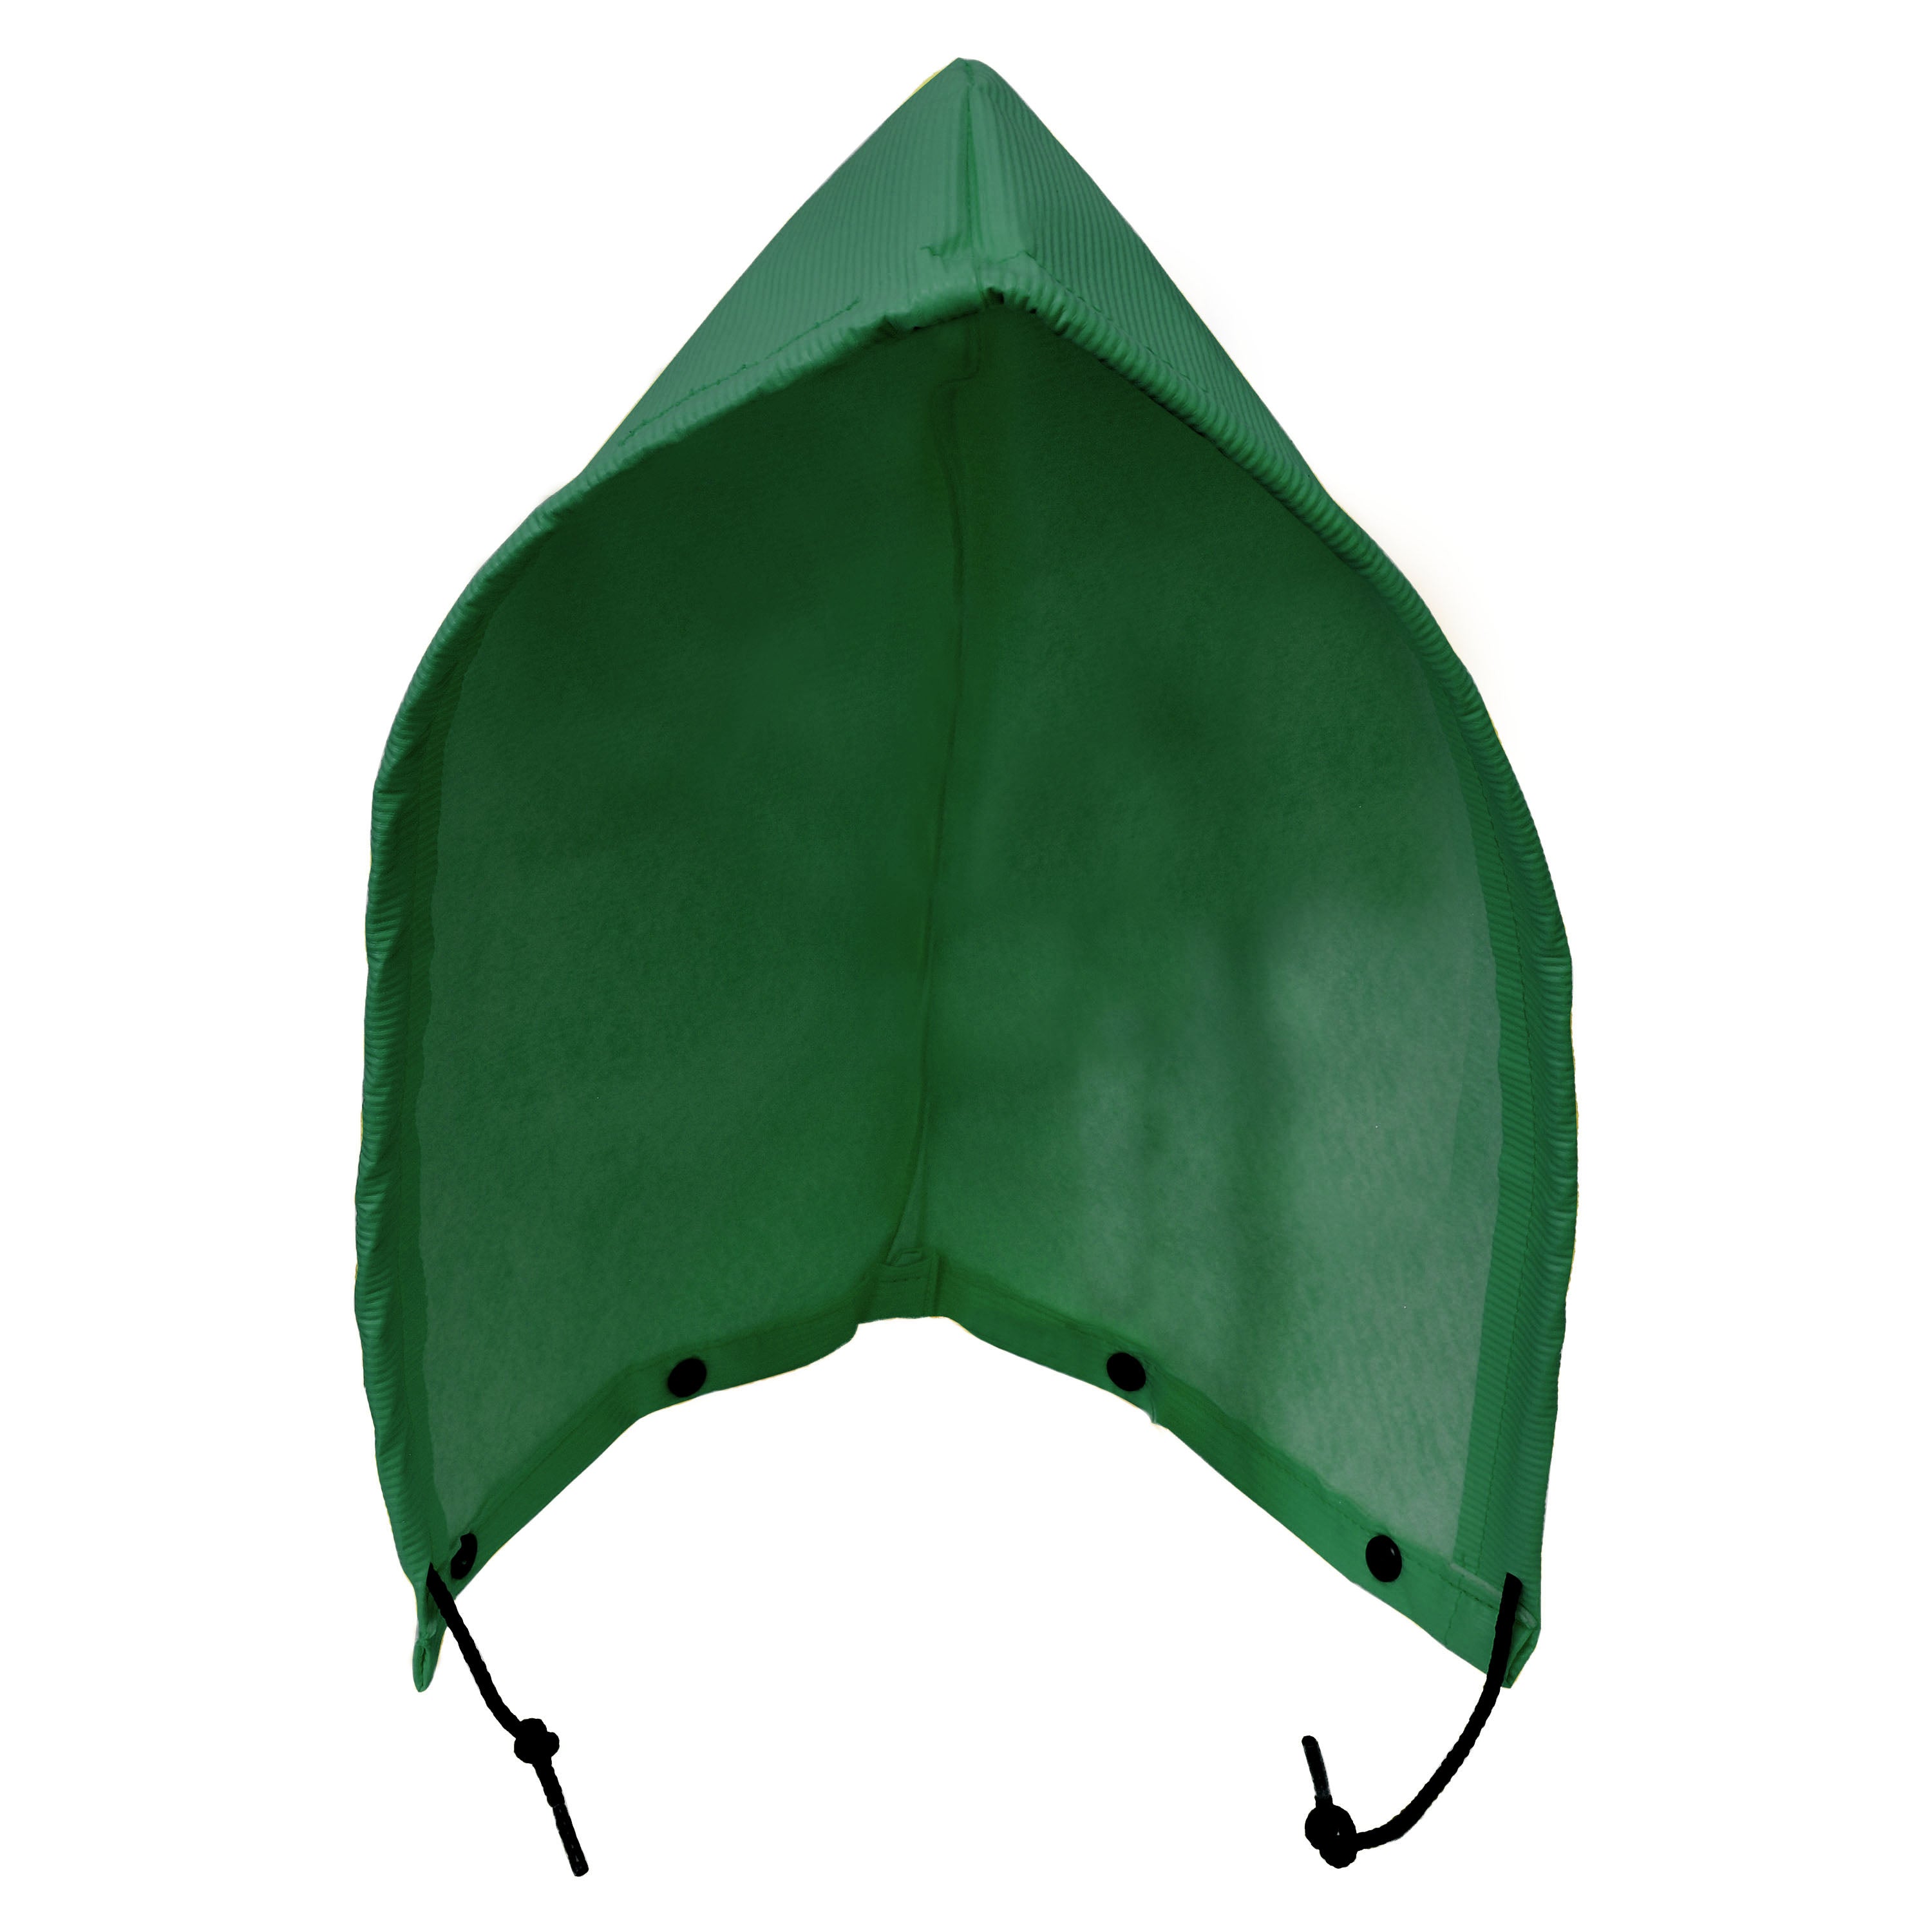 Neese 60HO Outworker Hood - Green - Universal Size-eSafety Supplies, Inc